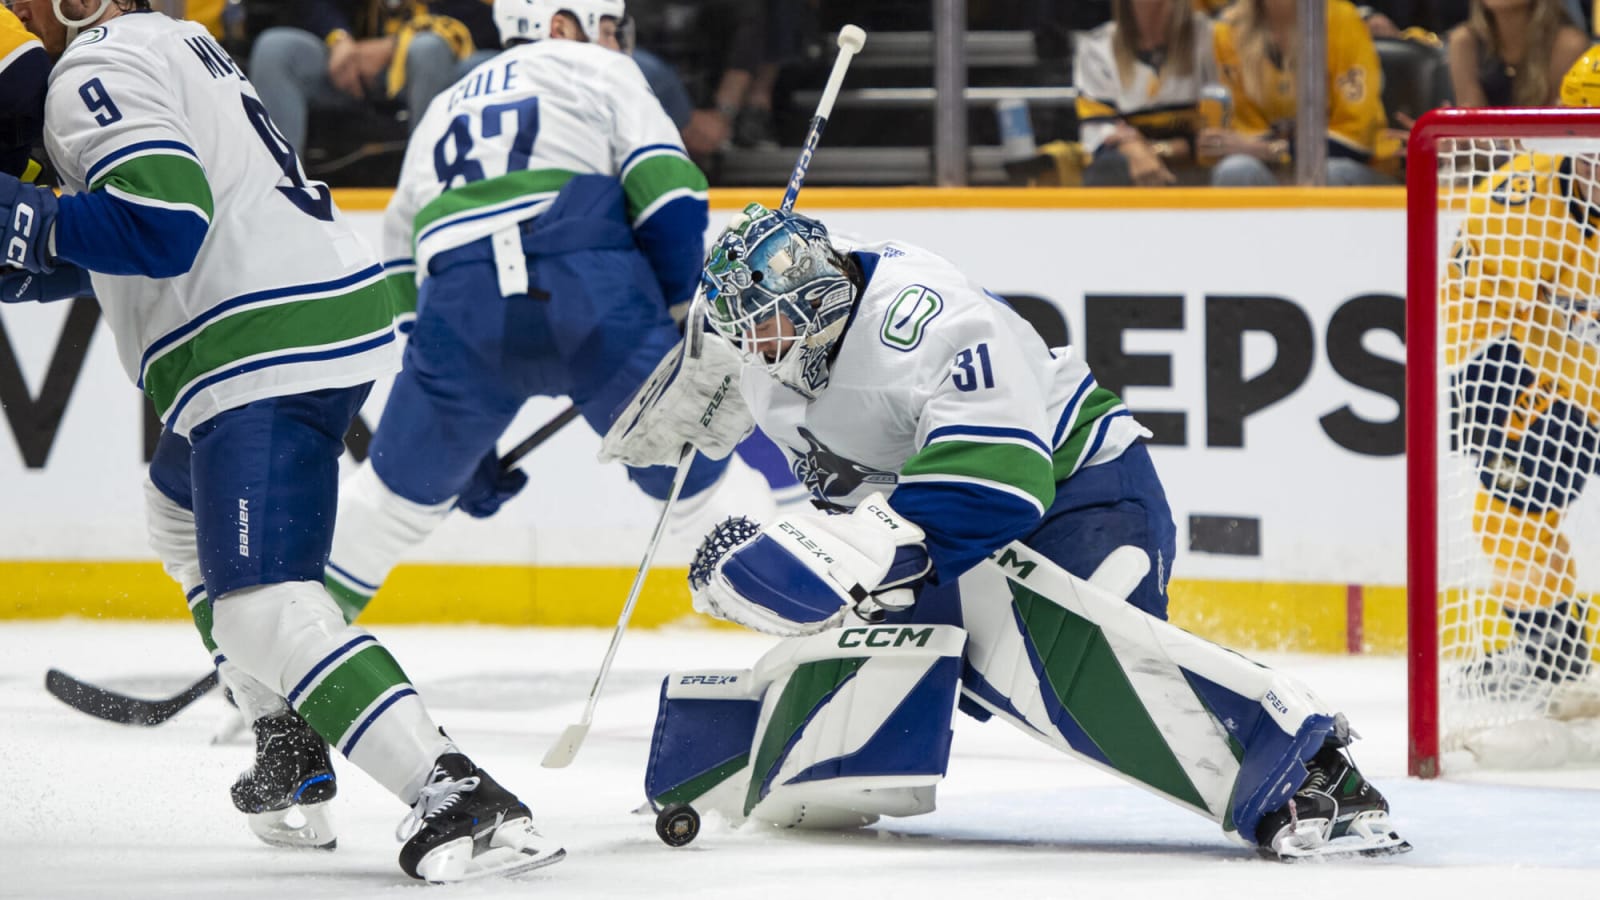  Canucks advance to second round as Arturs Silovs posts shut out in 1-0 win over Nashville